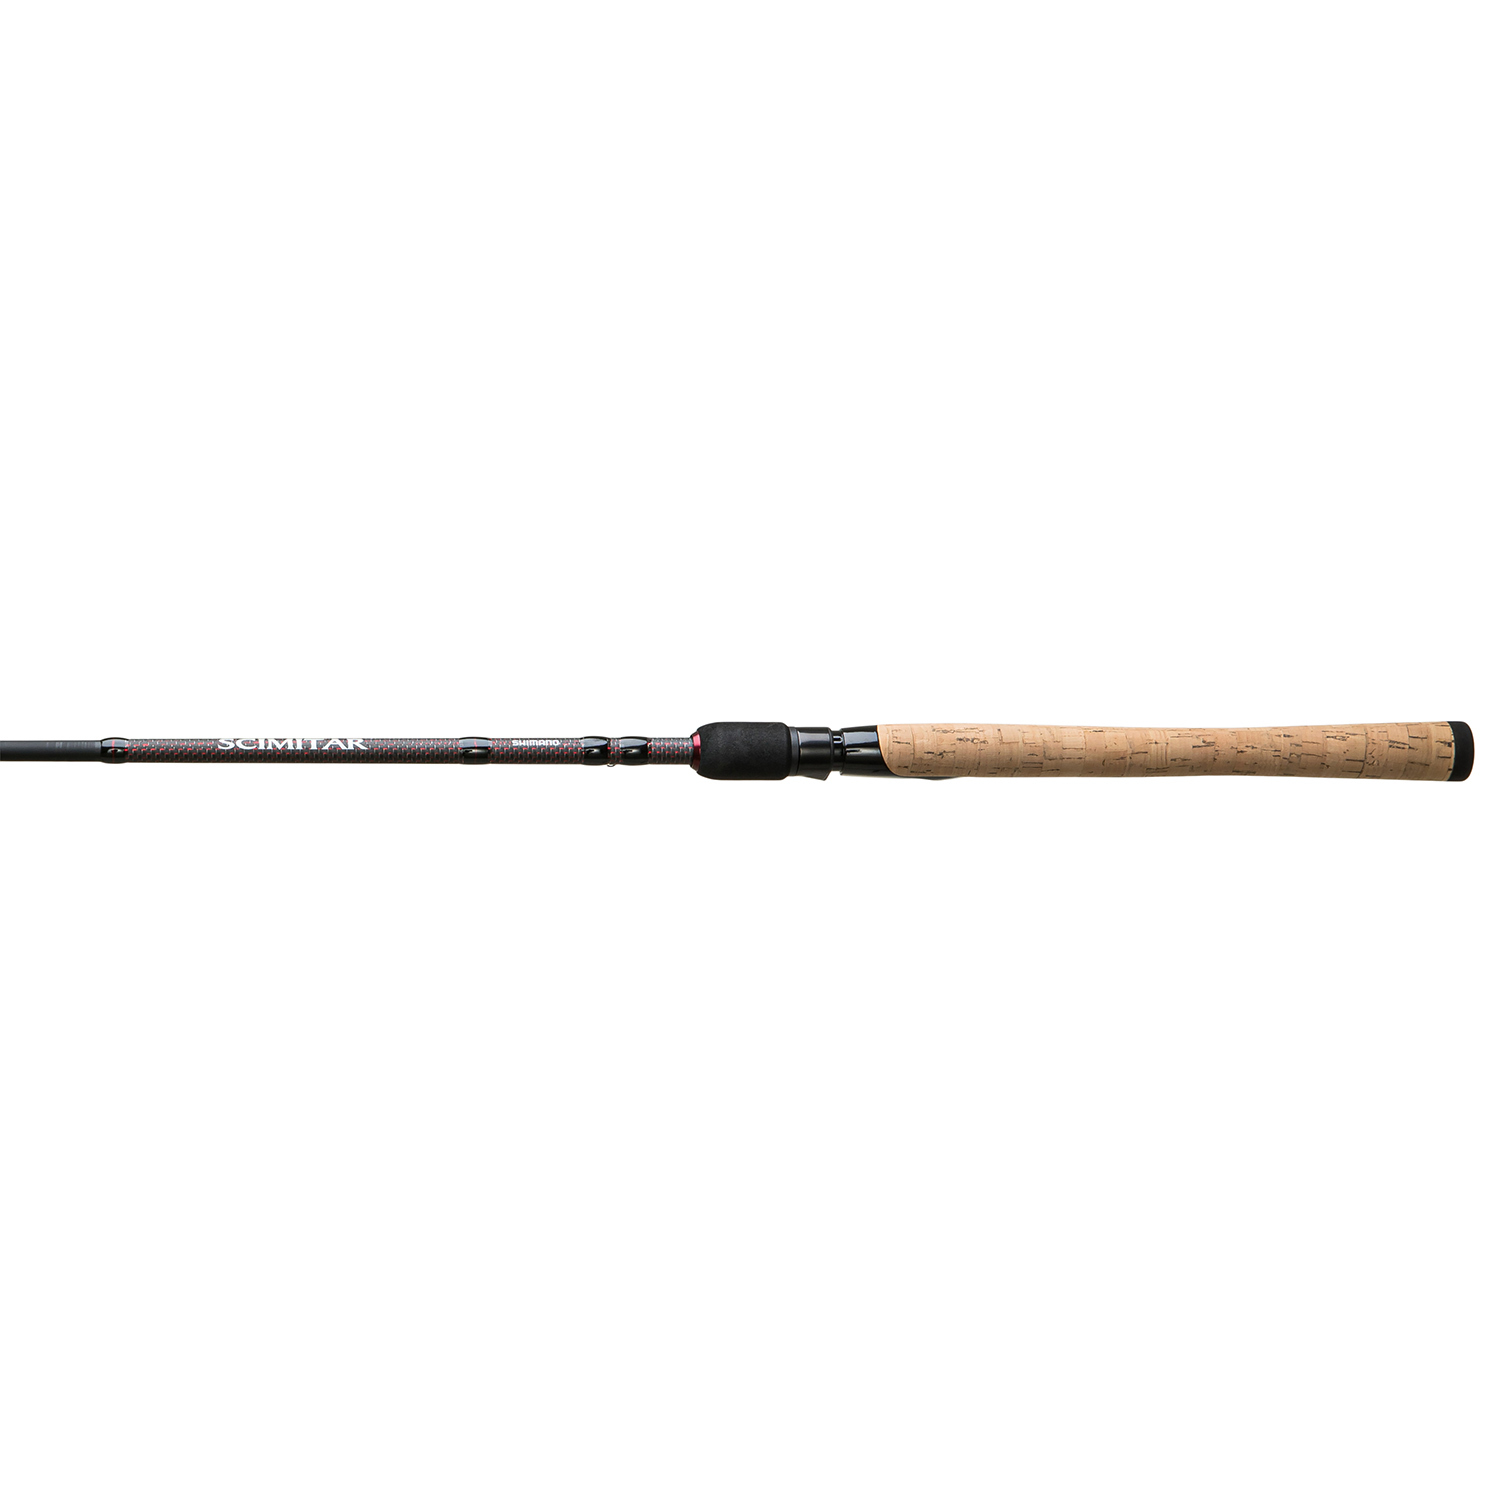  Shimano Solora Heavy 2 Piece Casting Rod (6-Feet 6-Inch,  Medium) : Spincasting Fishing Rods : Sports & Outdoors